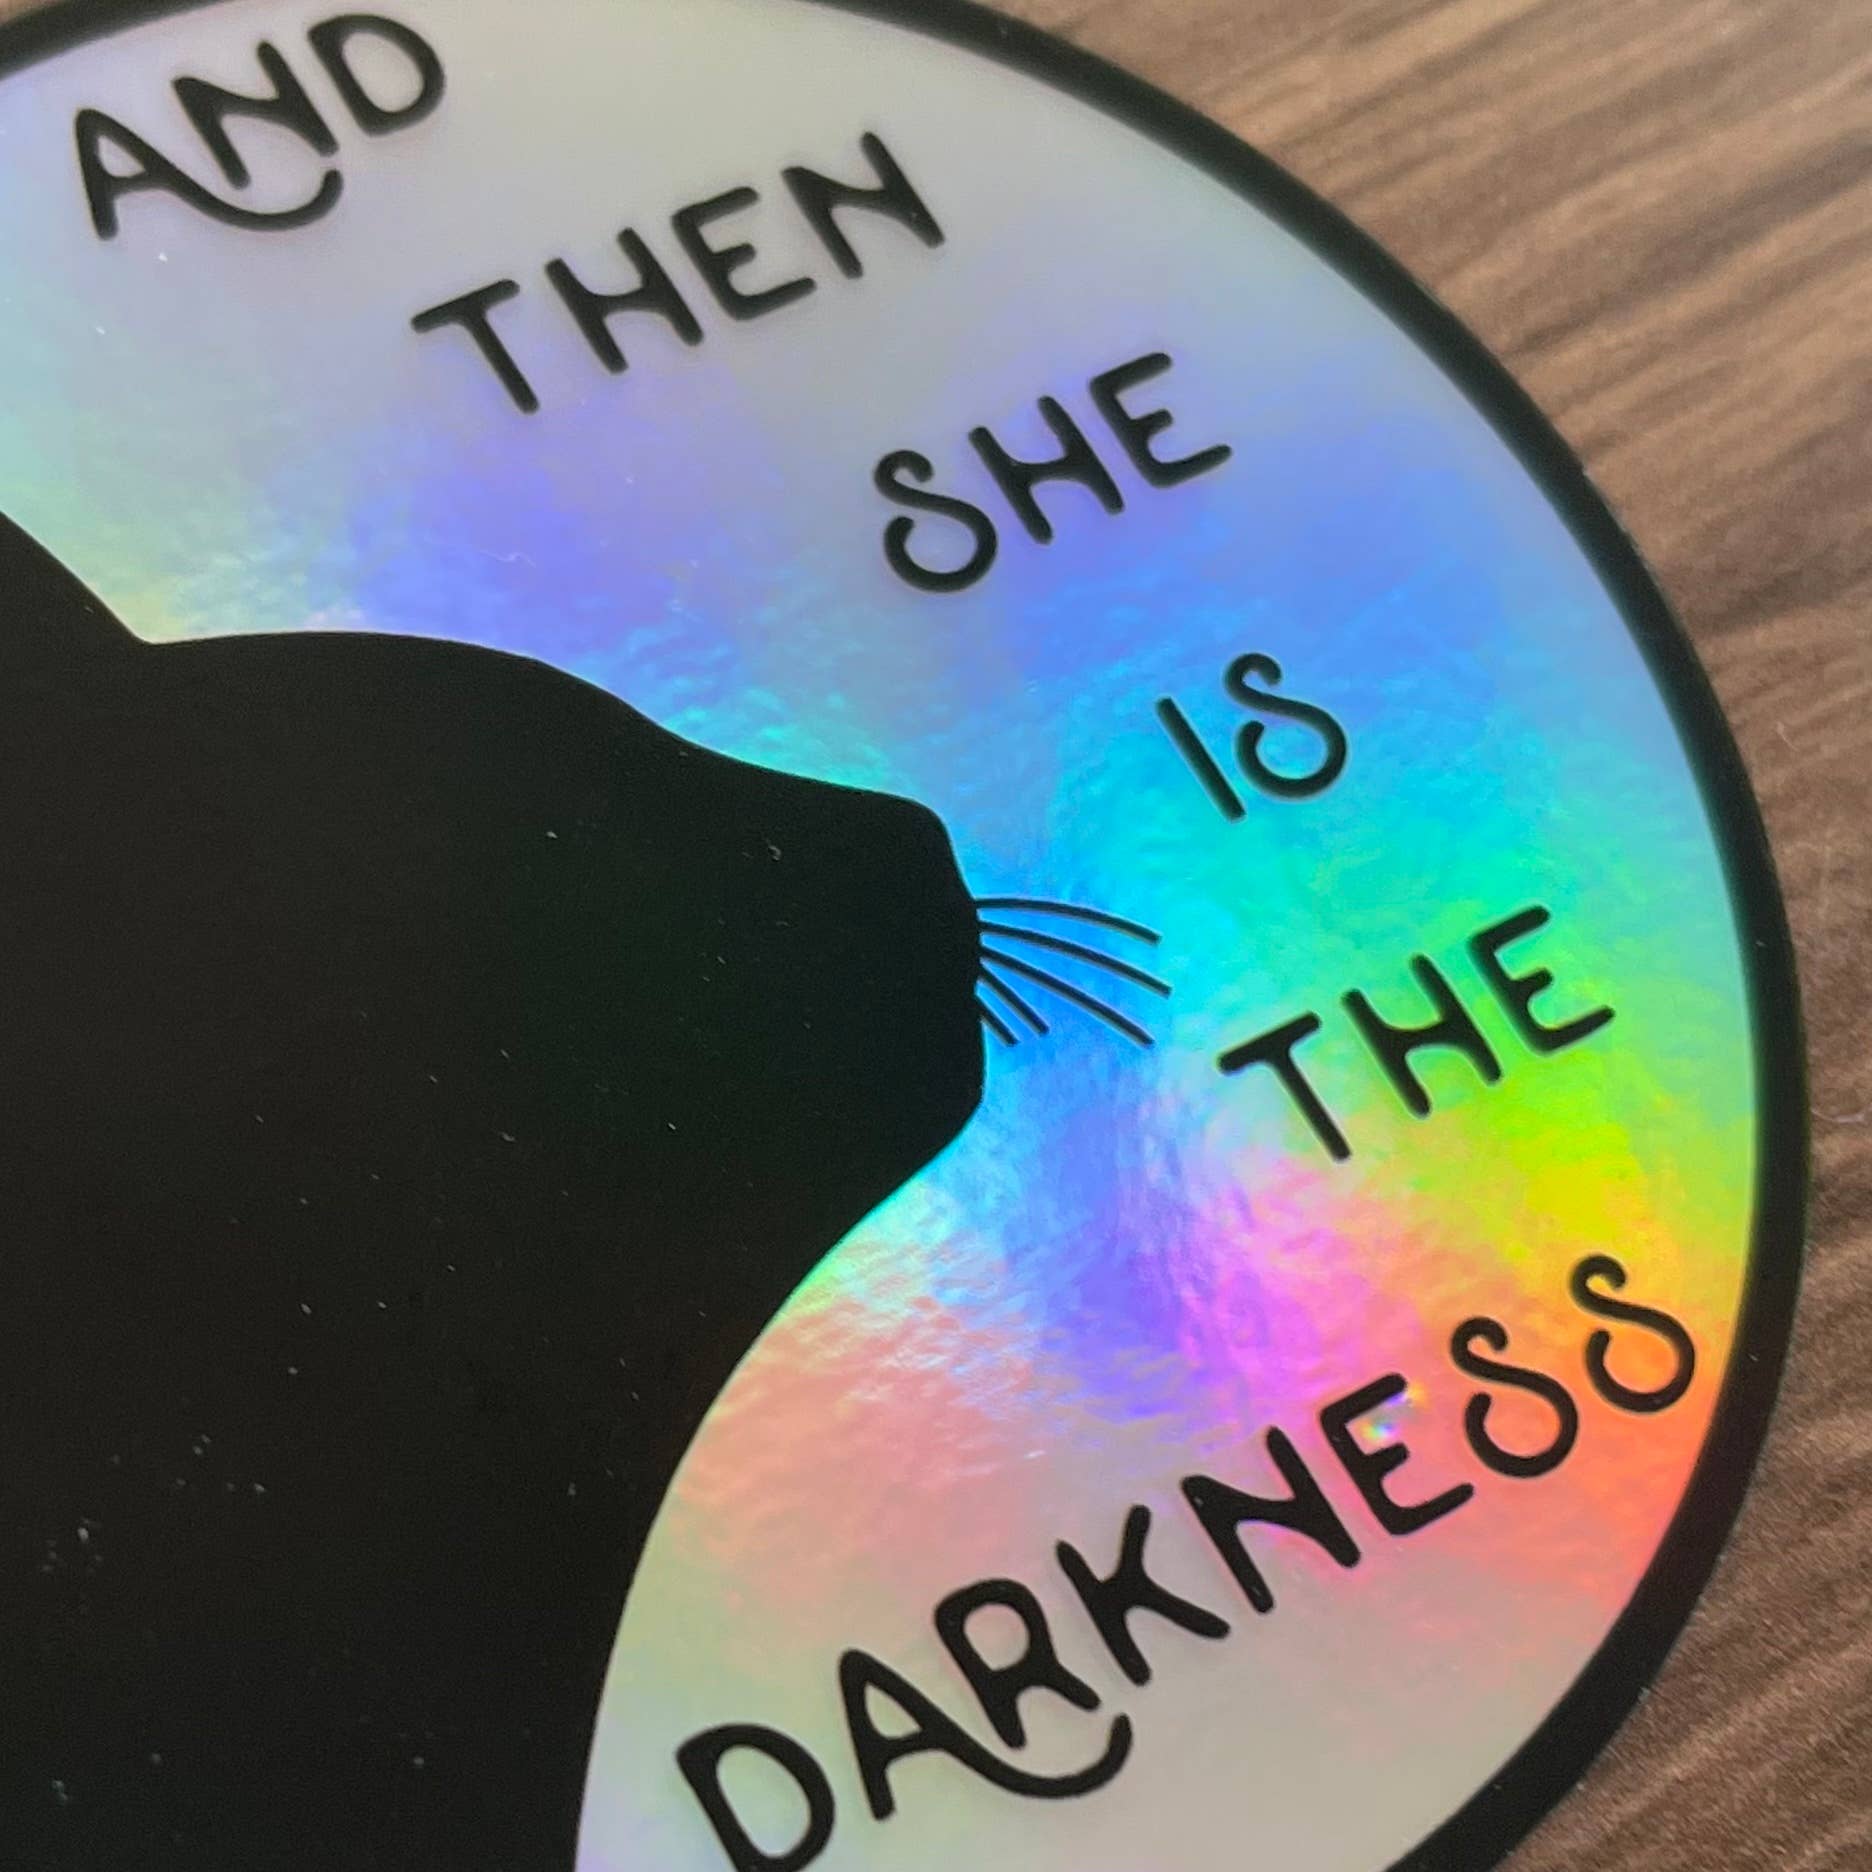 And then she is the darkness Holo sticker Fleetwood Mac